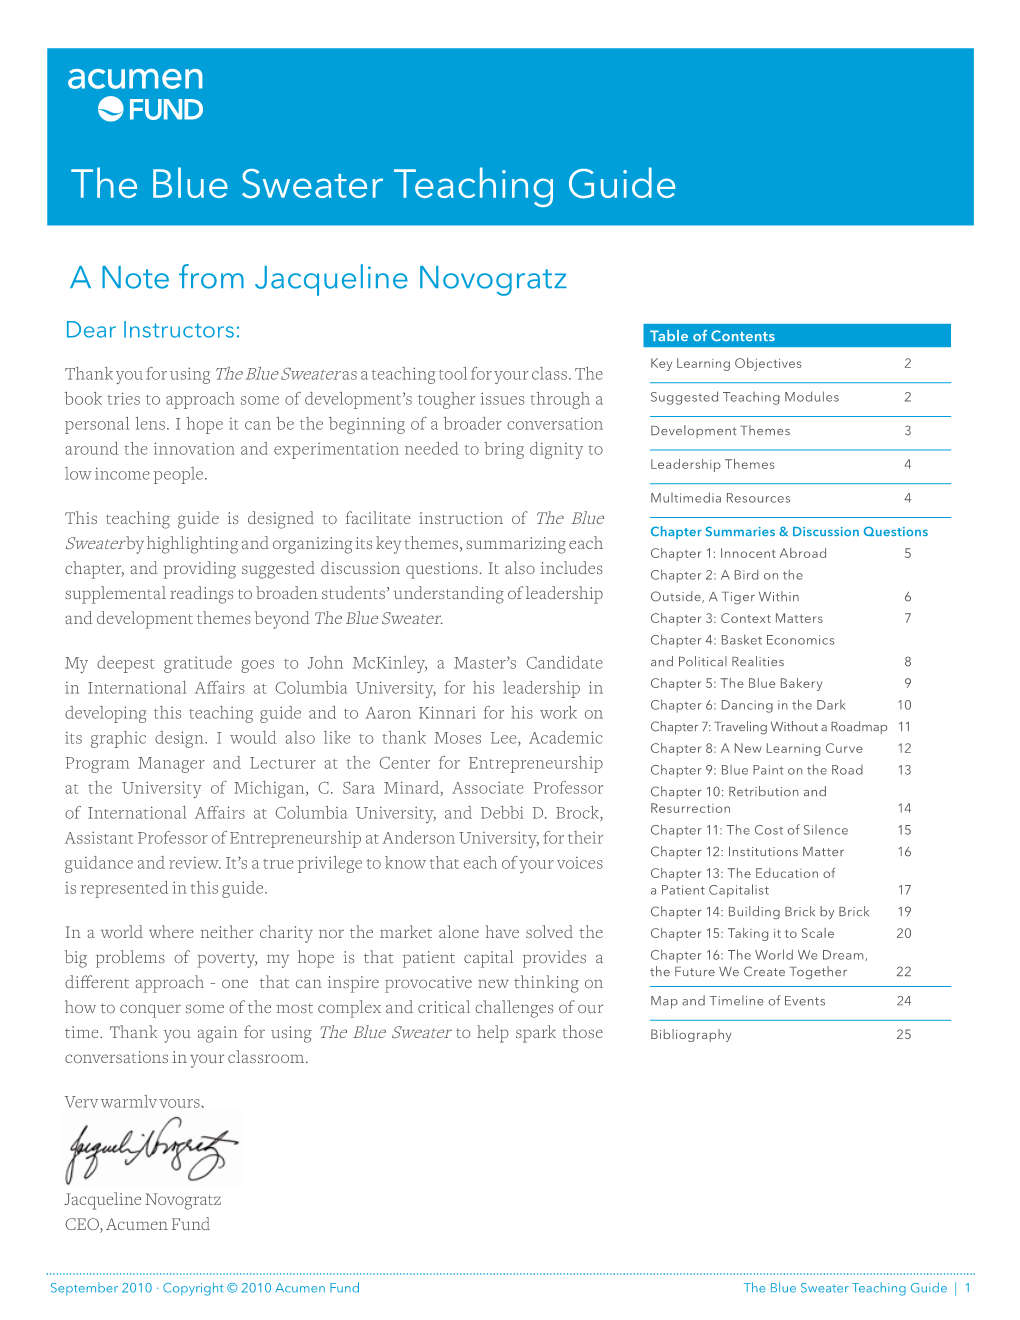 The Blue Sweater Teaching Guide